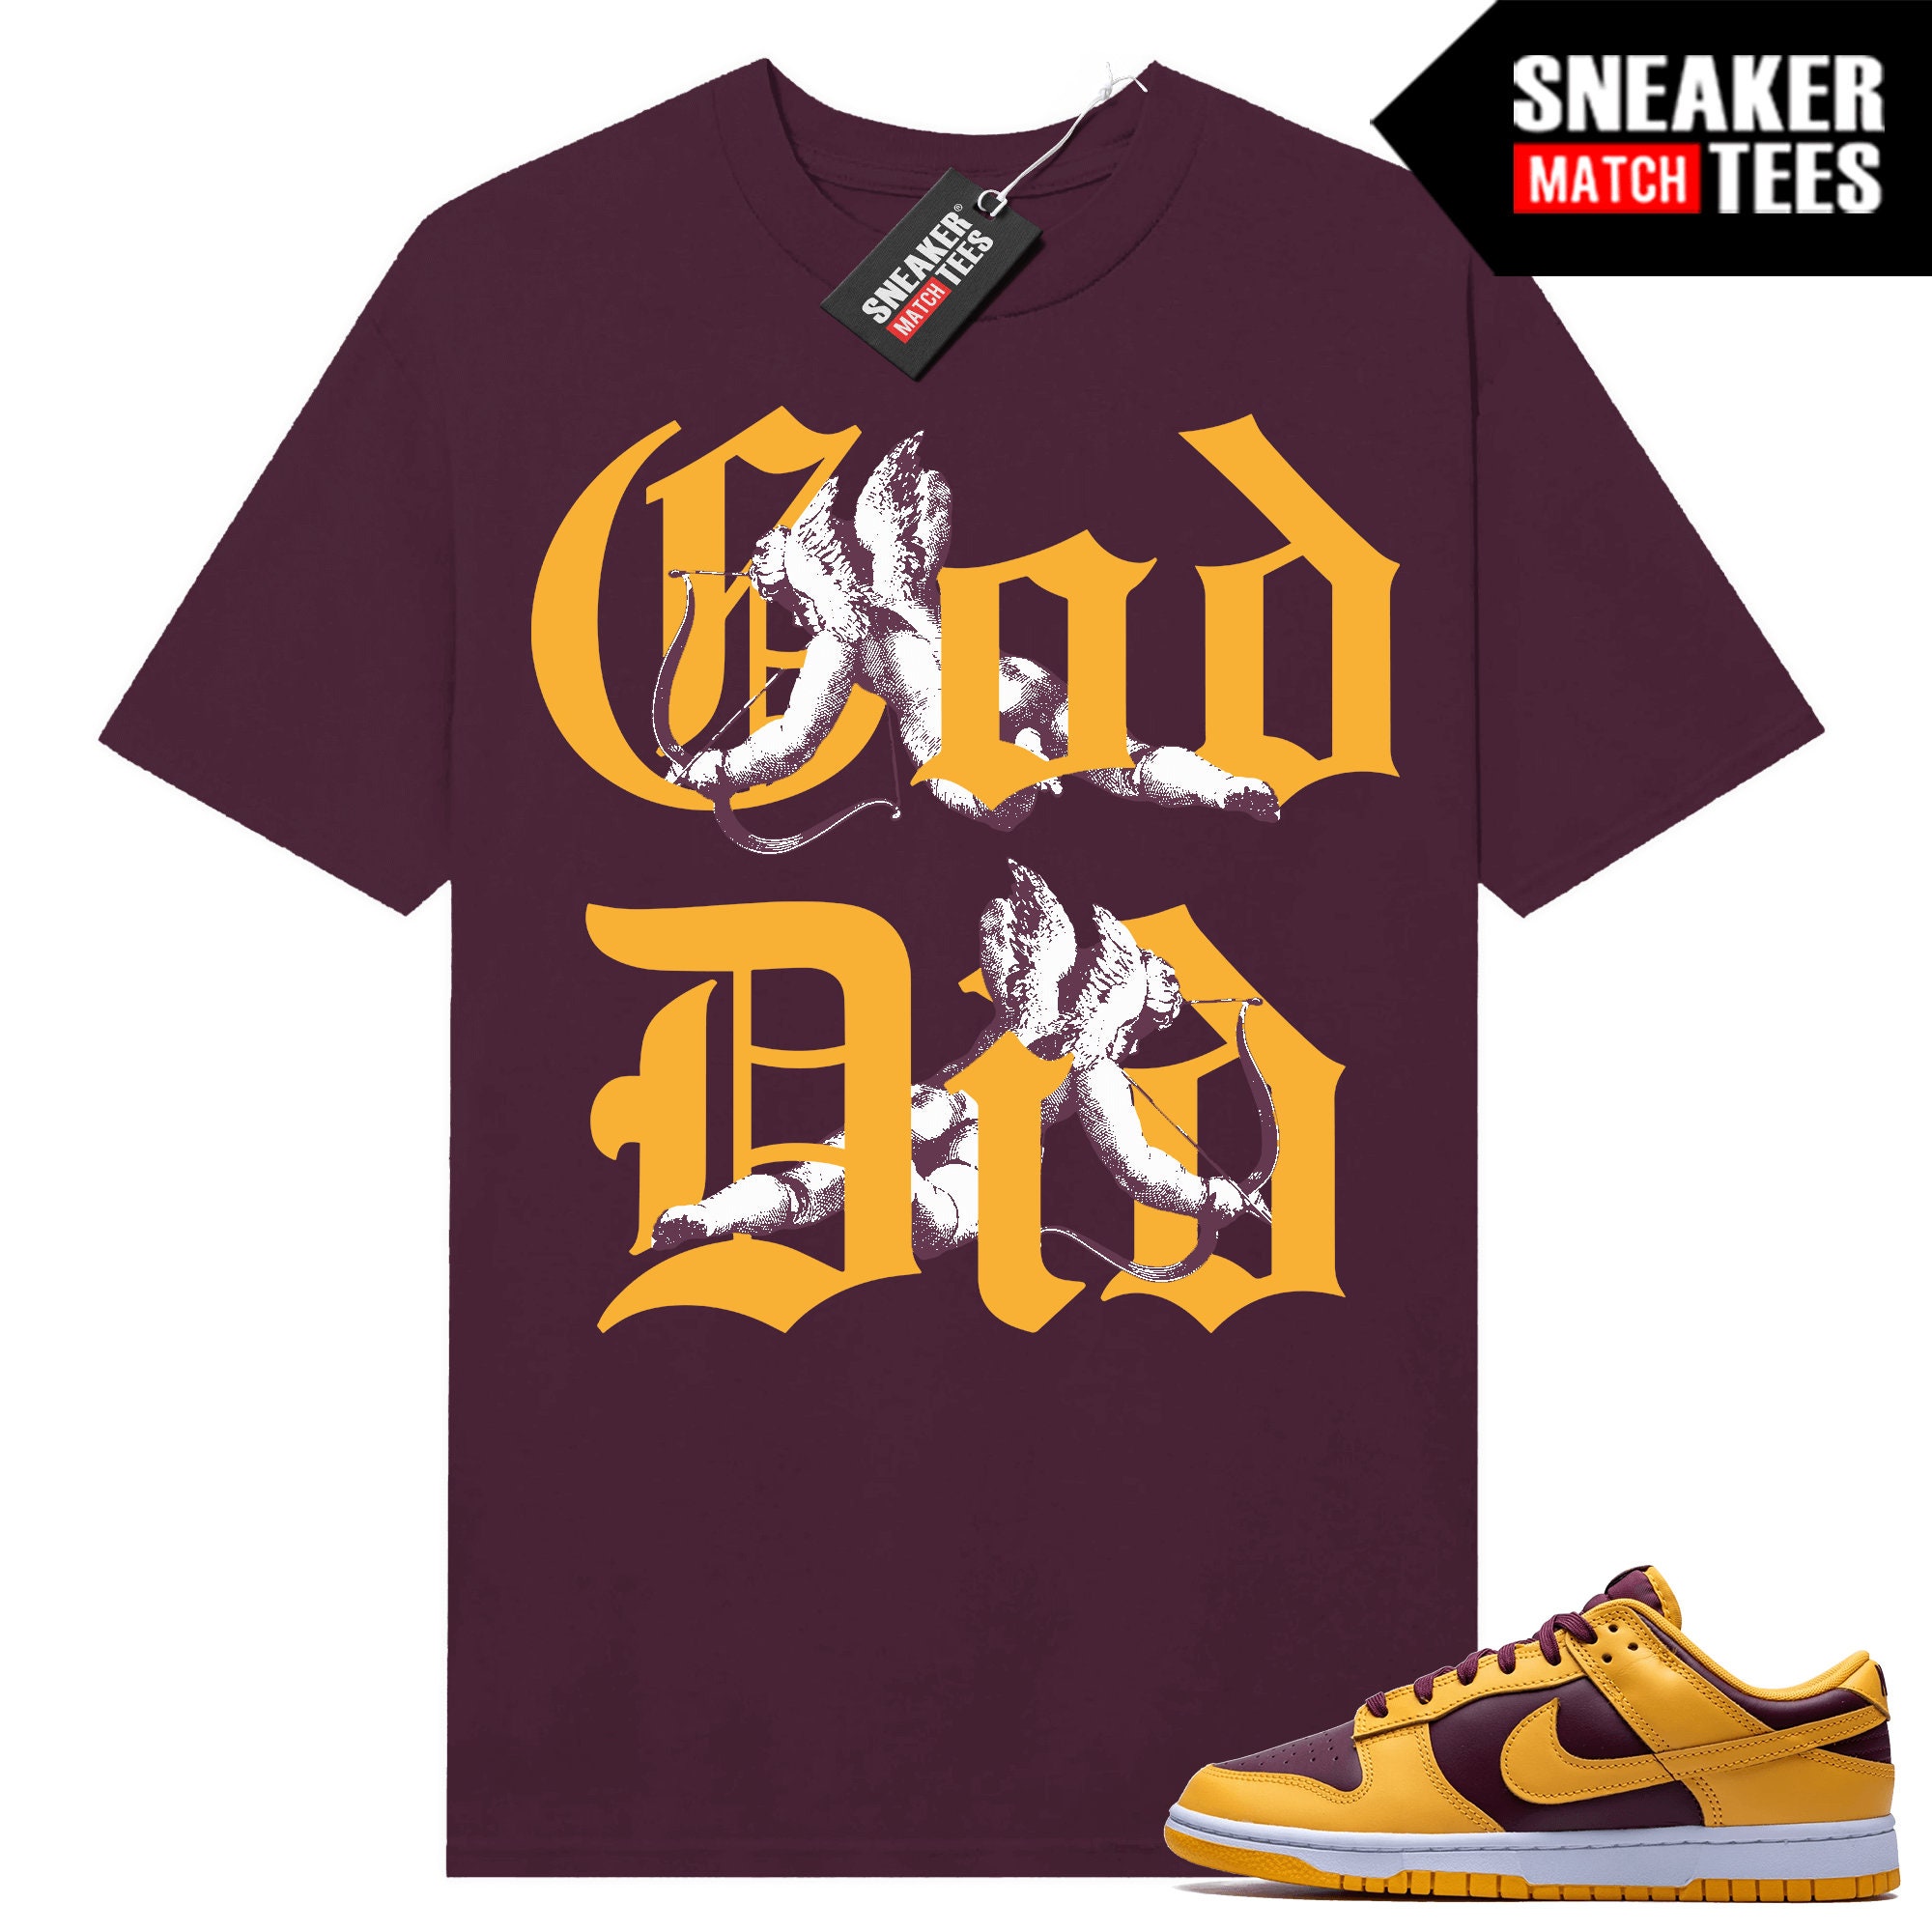 Arizona State Dunk Low to match Sneaker Match Tees Maroon "God Did"